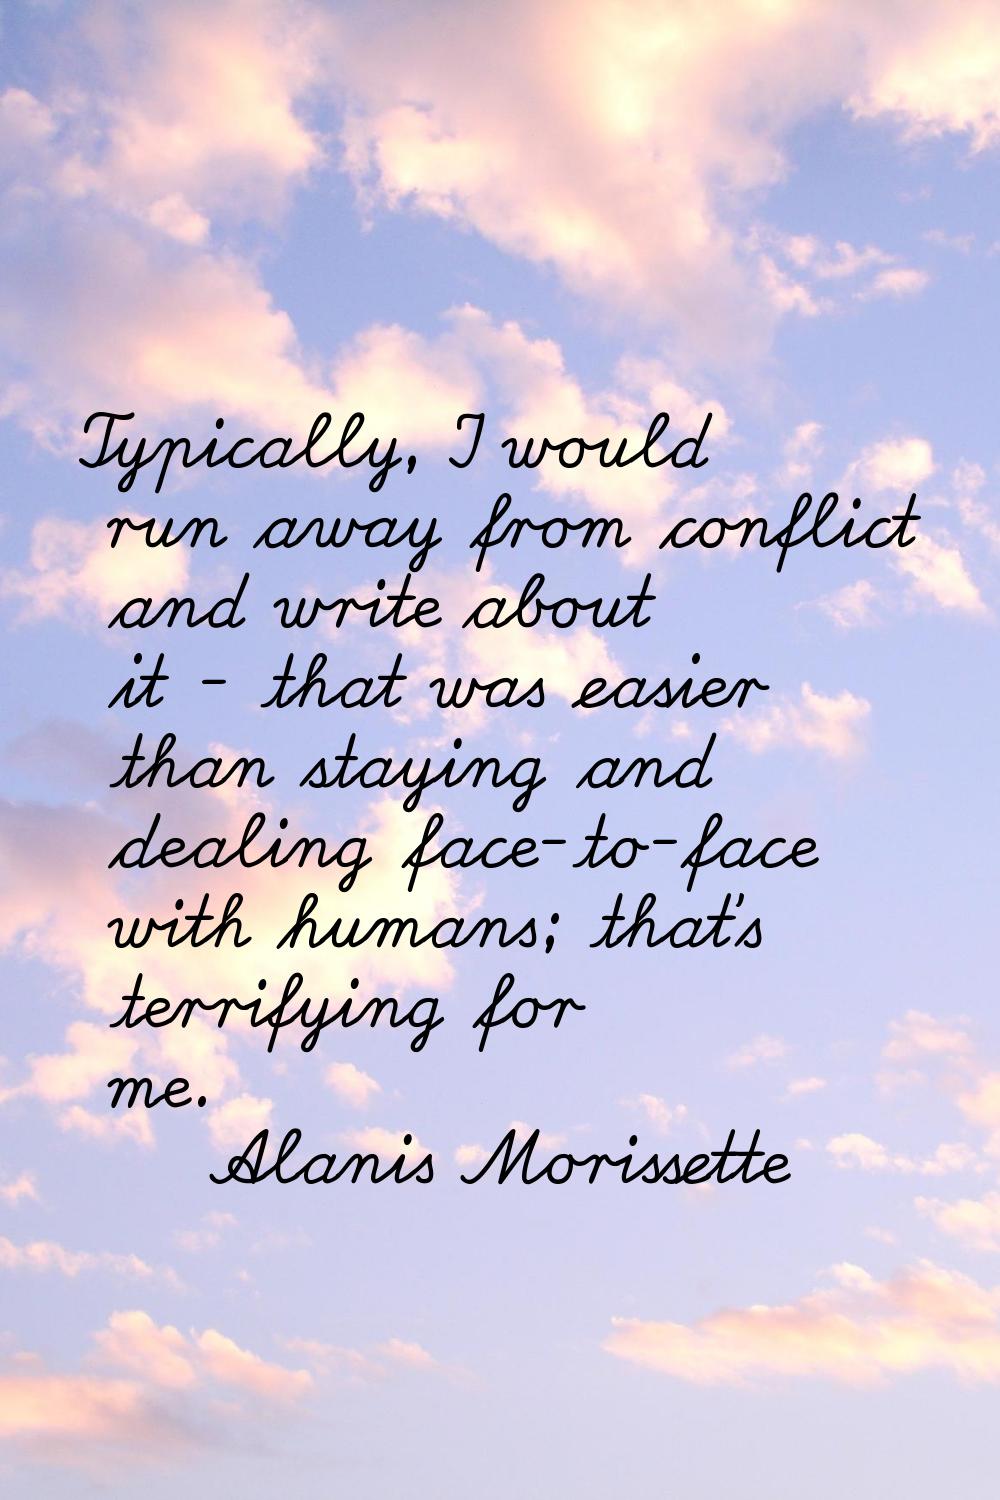 Typically, I would run away from conflict and write about it - that was easier than staying and dea